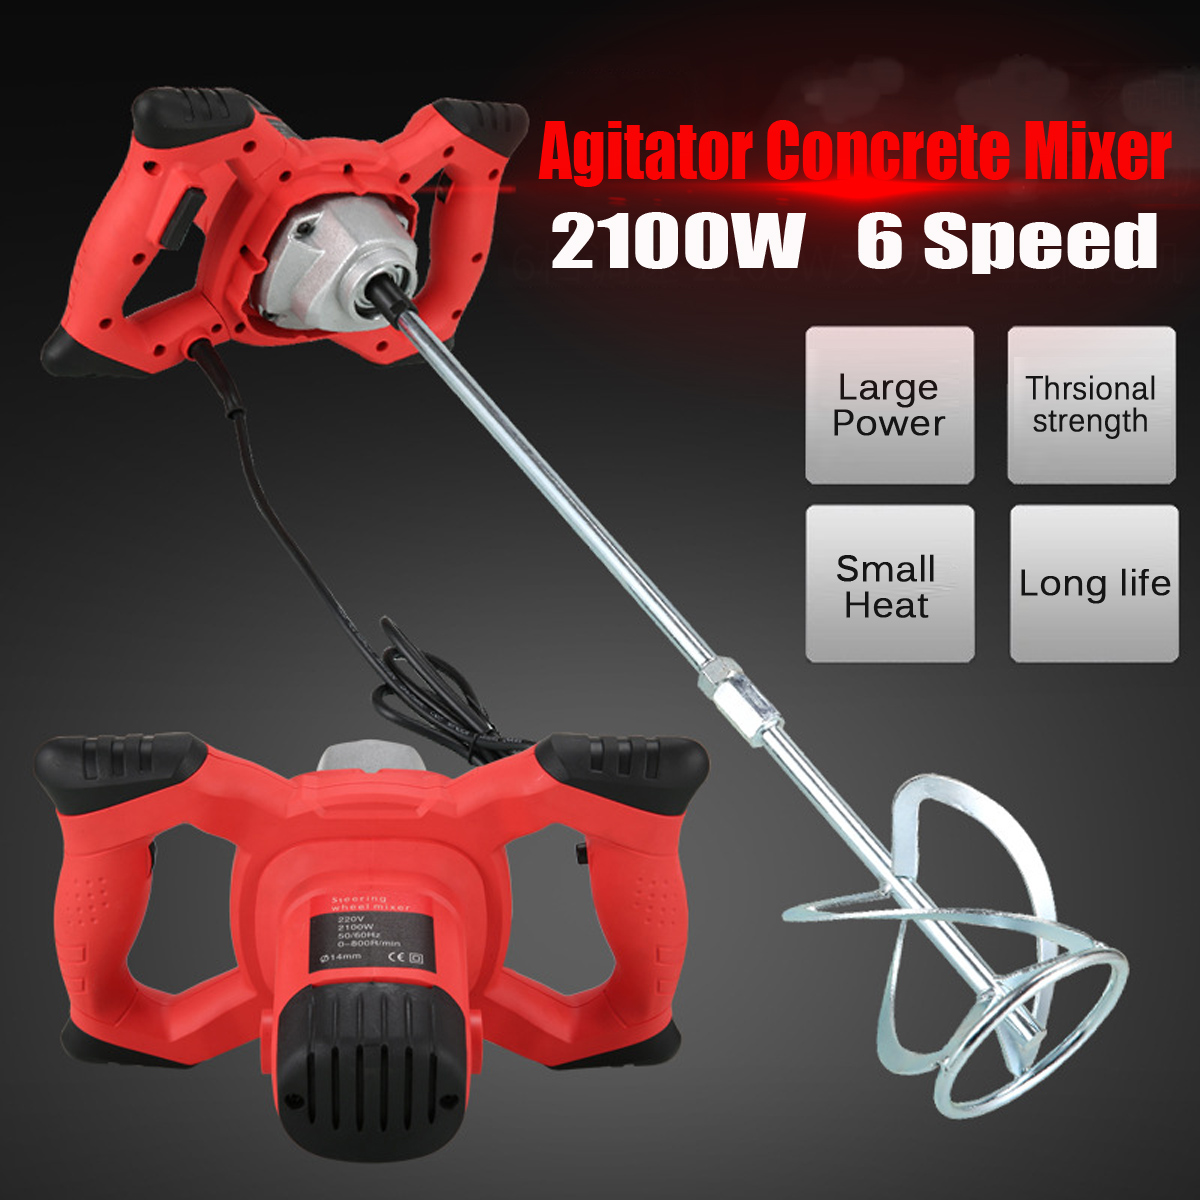 Cement-Mixer-Concrete-Grout-Painting-Hand-Power-Mixer-6-Speed-1697783-1